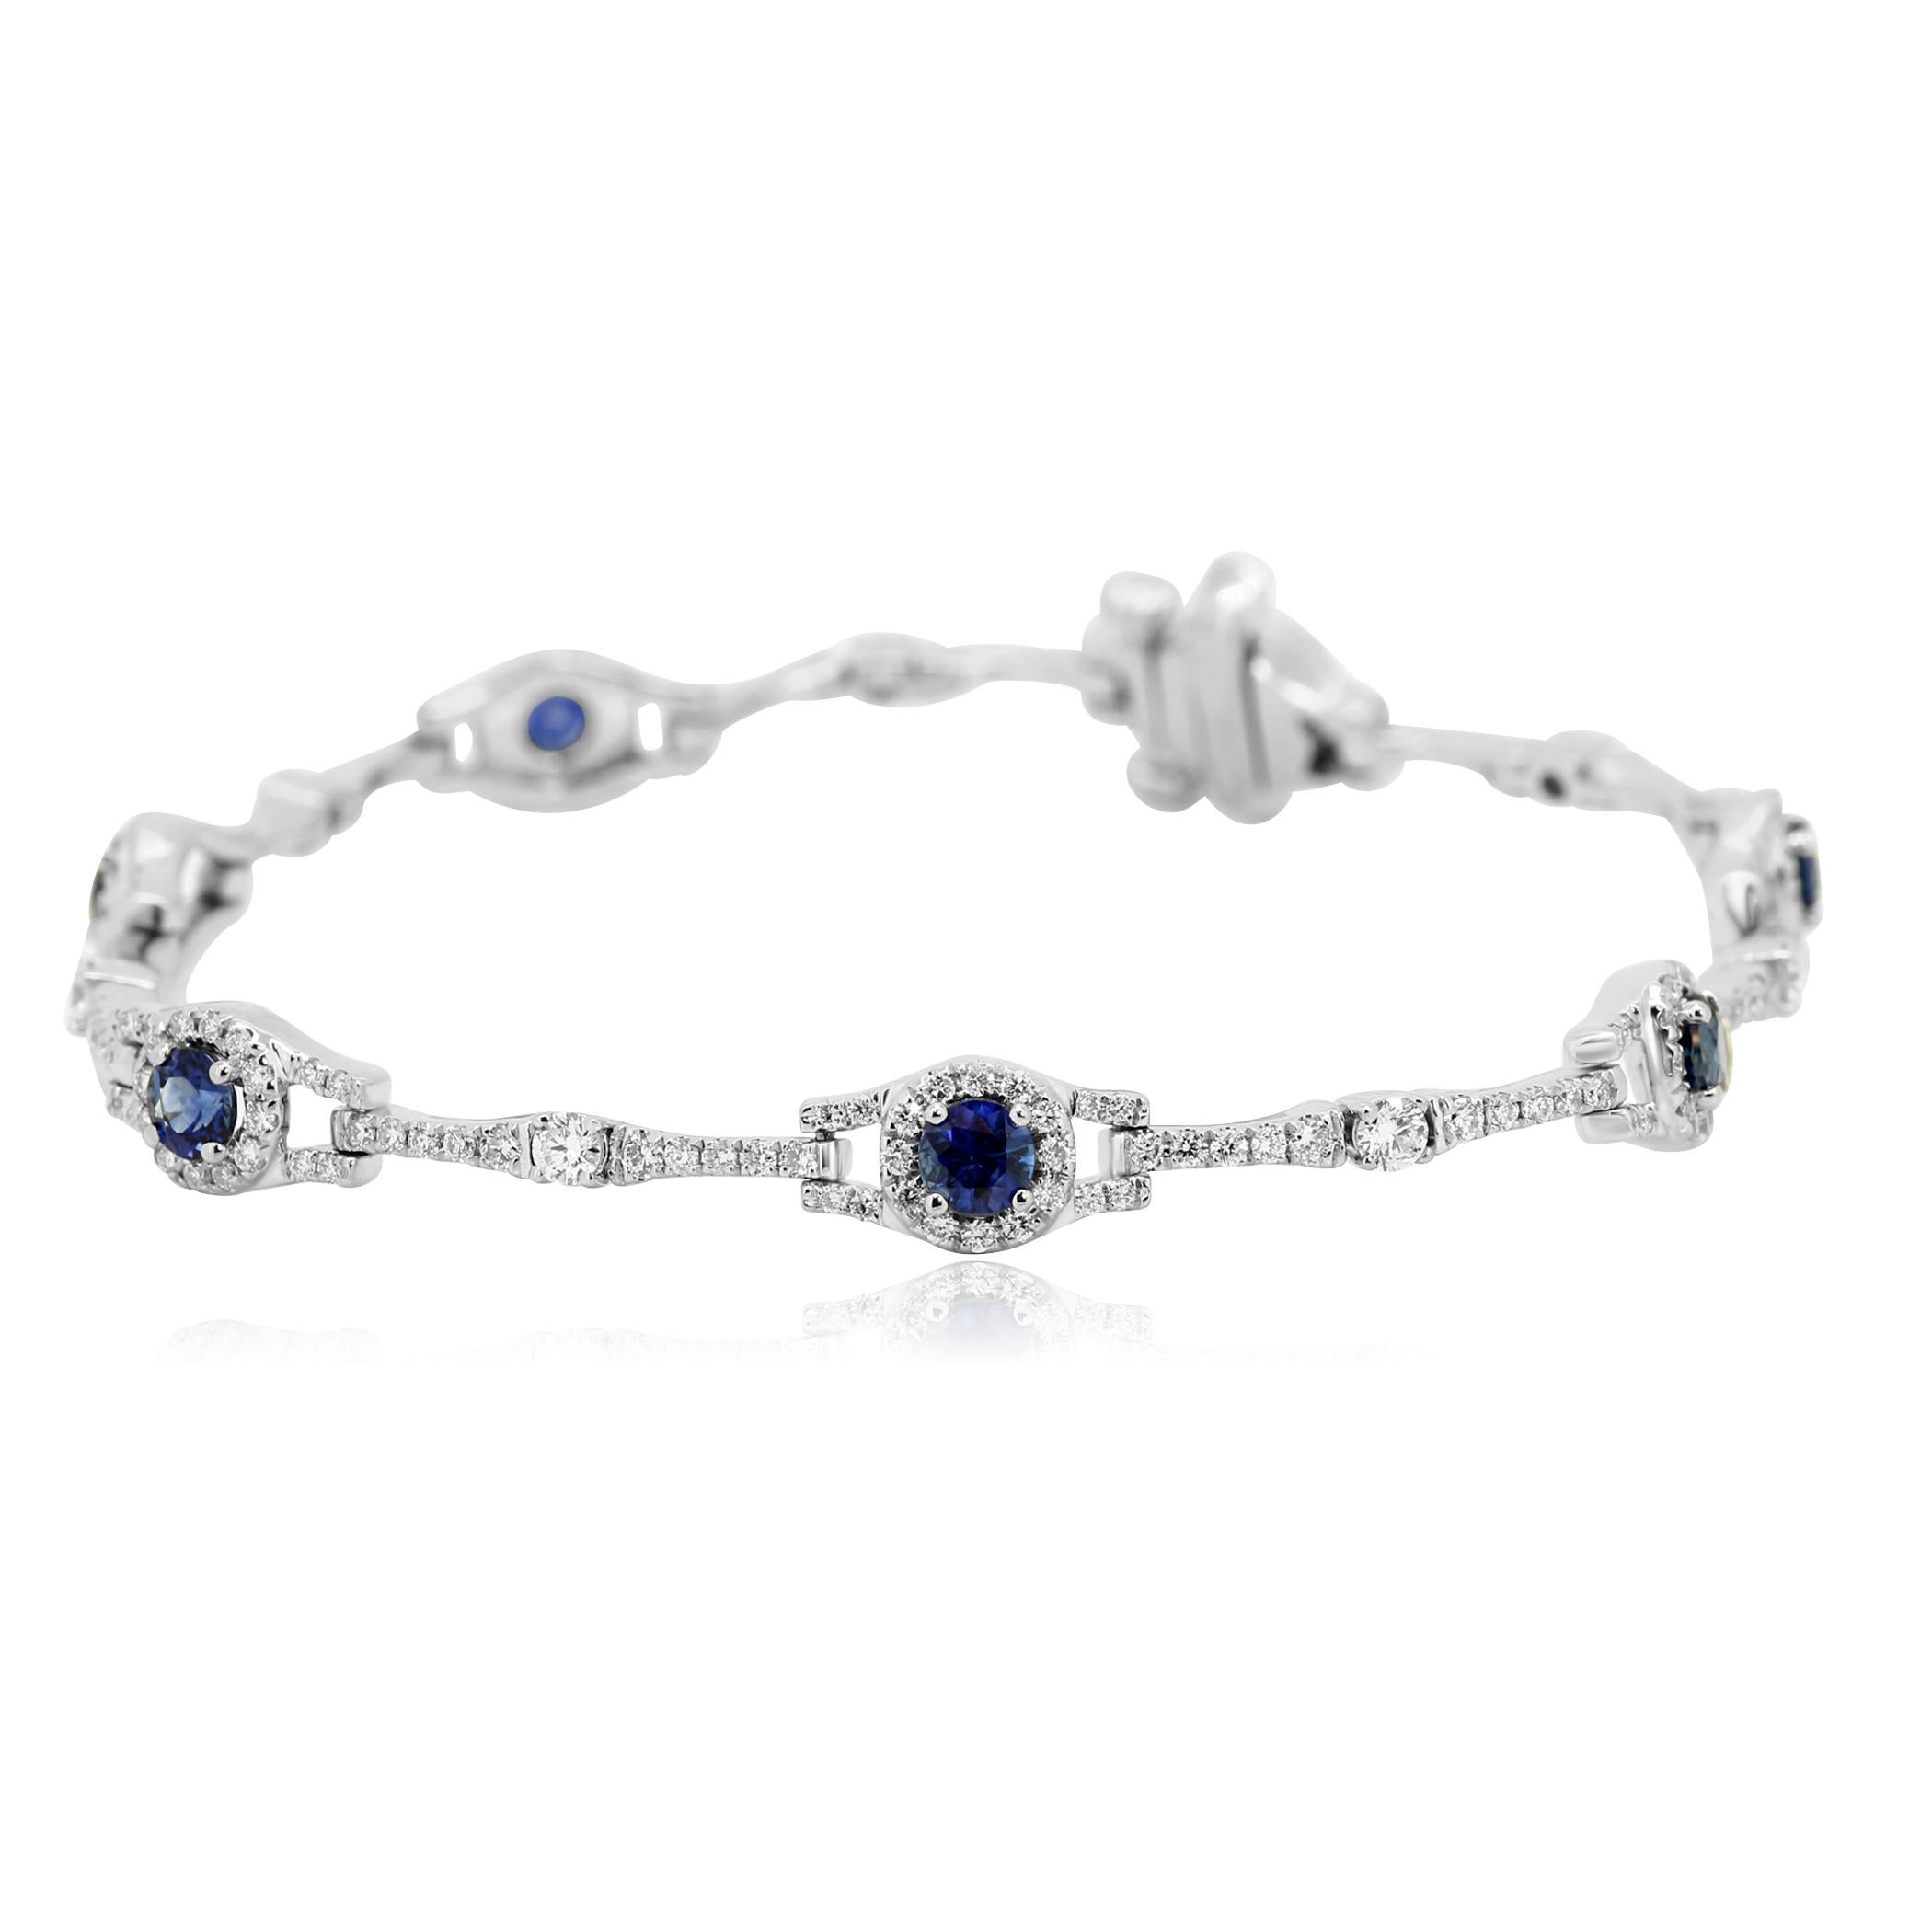 Gorgeous Blue Sapphire Rounds 1.55 Carat Encircled in Halo of White Round Diamonds 1.52 Carat in Stunning 14K White Gold Everyday Wear Bracelet.

Style available in different price ranges. Prices are based on your selection of 4C's Cut, Color,